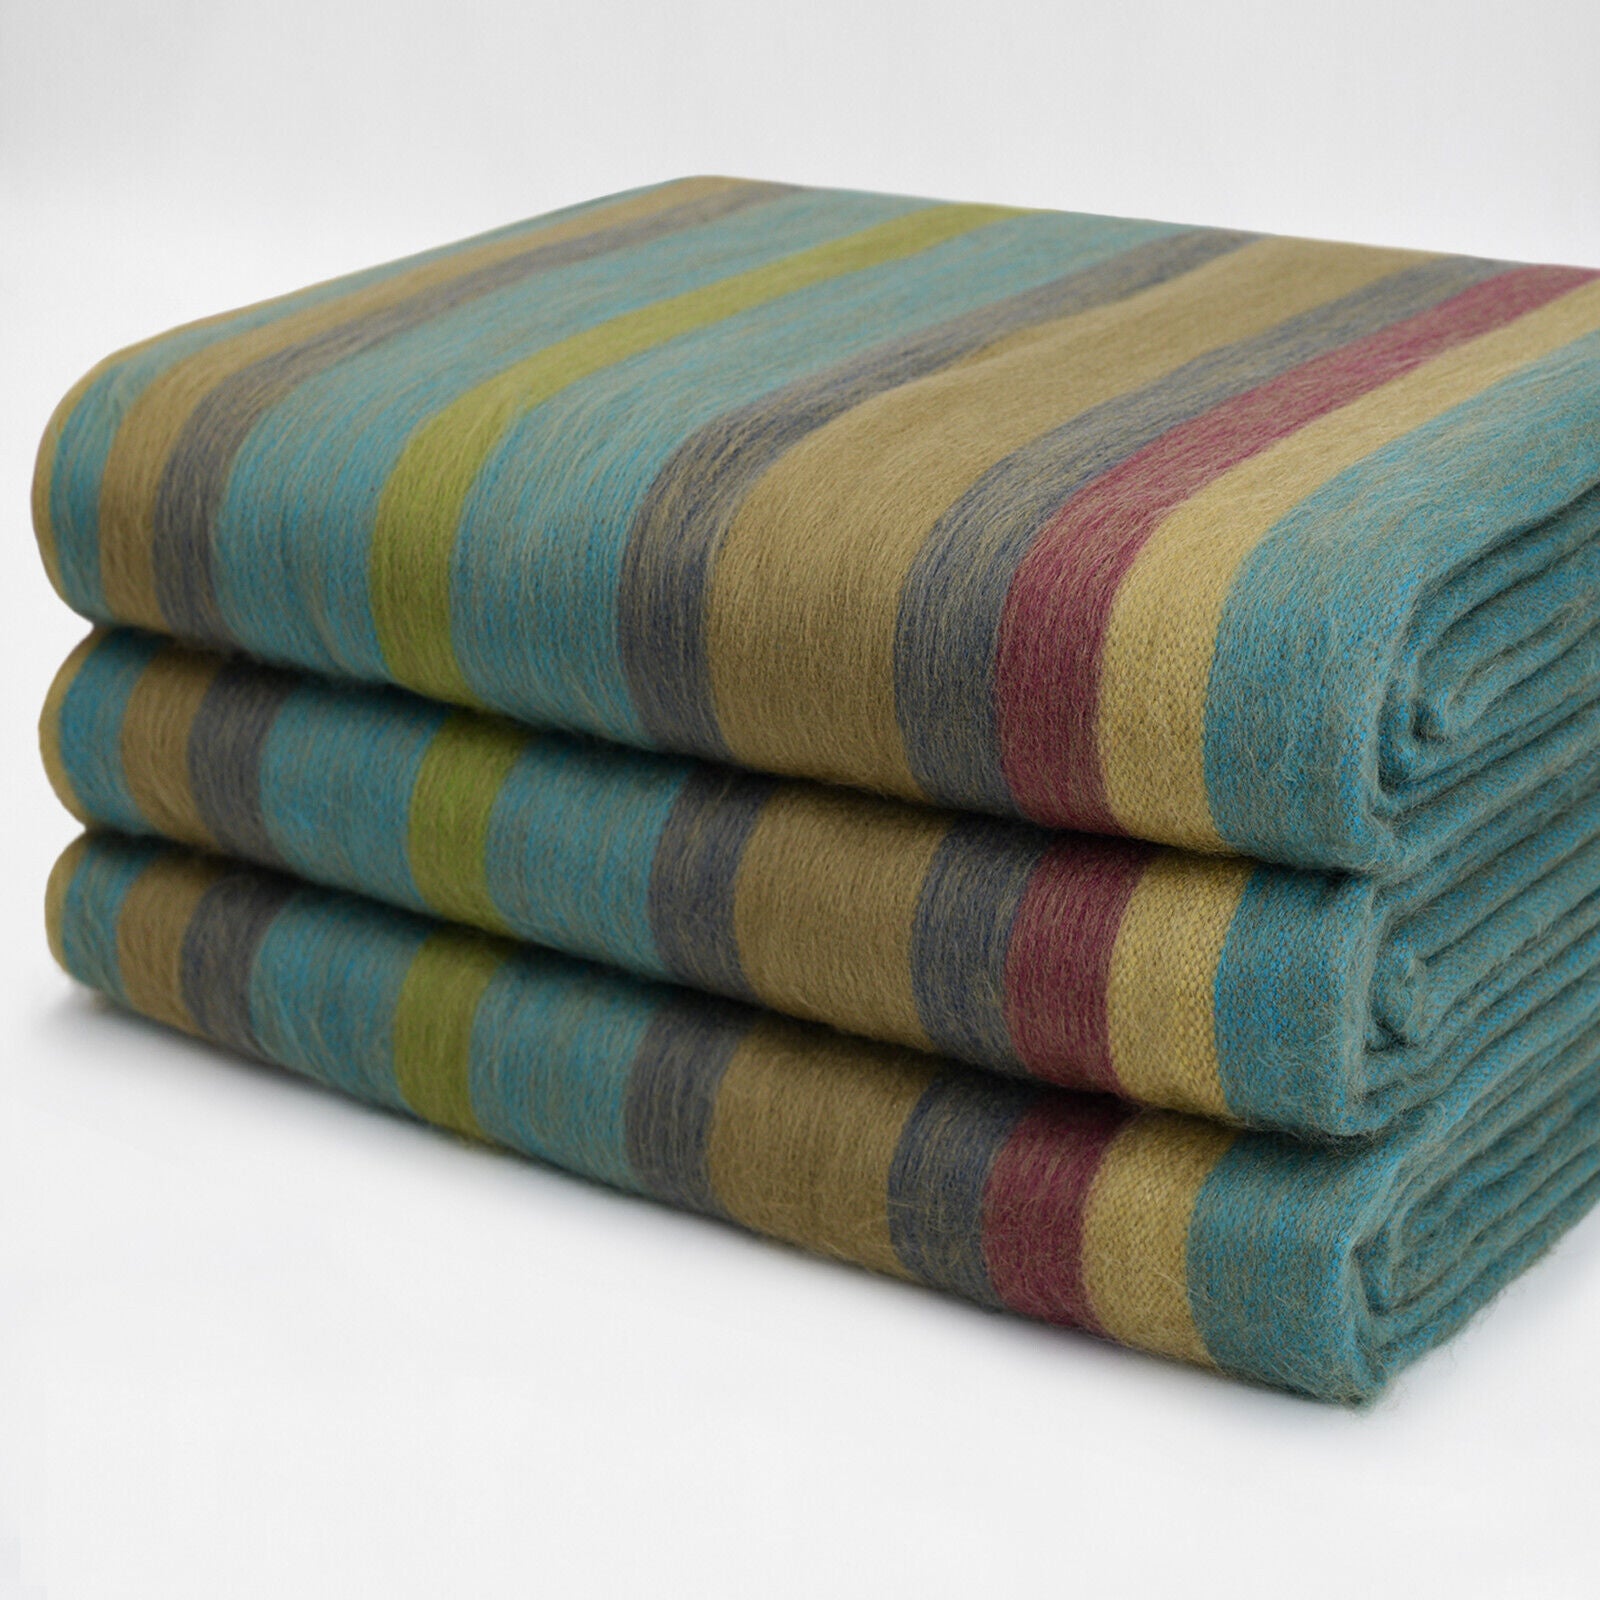 Pastaza - Baby Alpaca Wool Throw Blanket / Sofa Cover - Queen 98 x 68 in - Olive Green/Burgundy/Turquoise